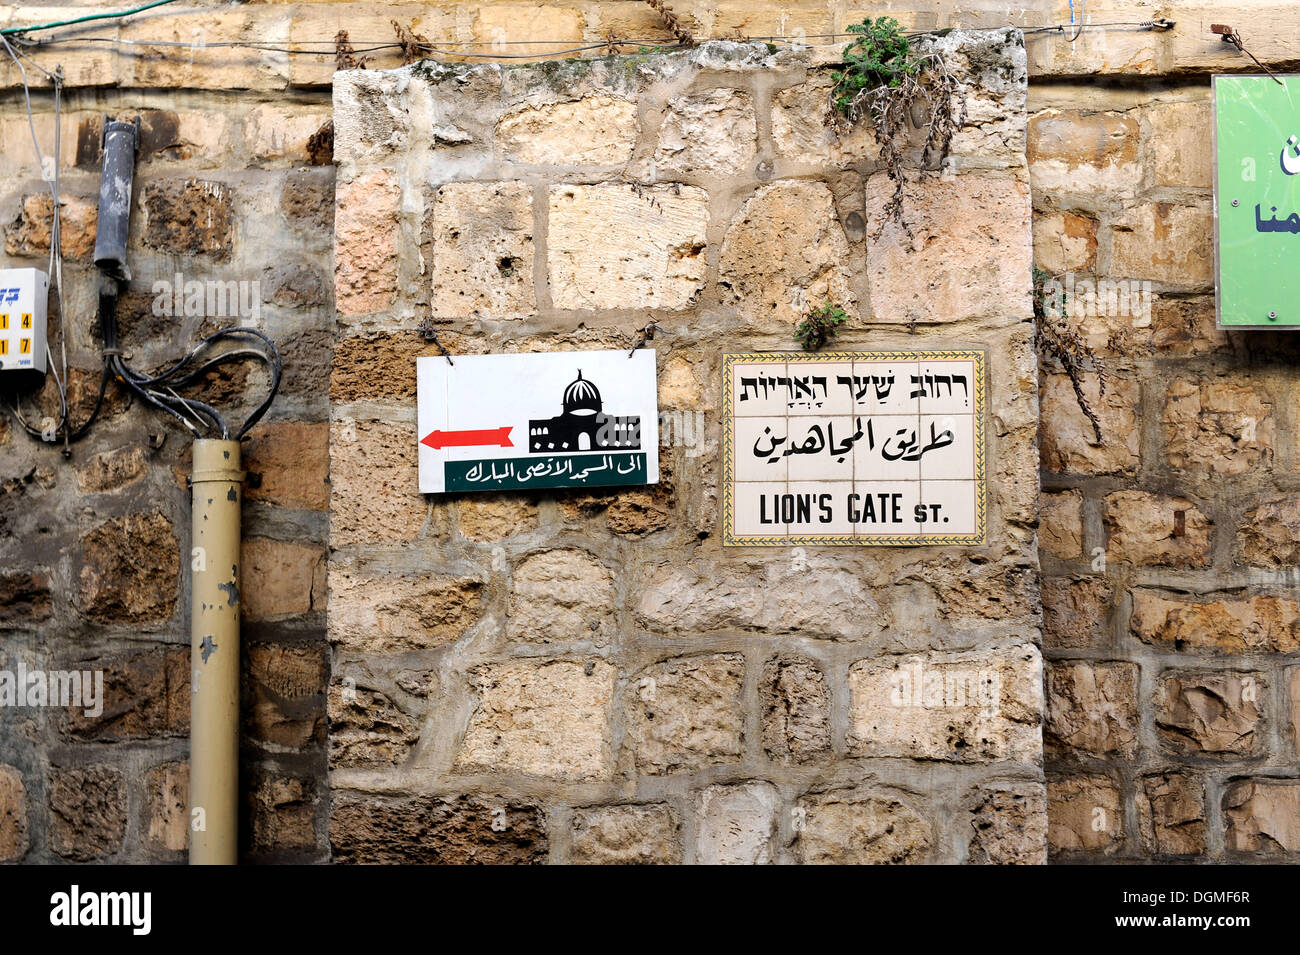 Start of Via Dolorosa, Way of Suffering, at the Lion's Gate, Muslim Quarter, Old City of Jerusalem, Israel, Middle East Stock Photo